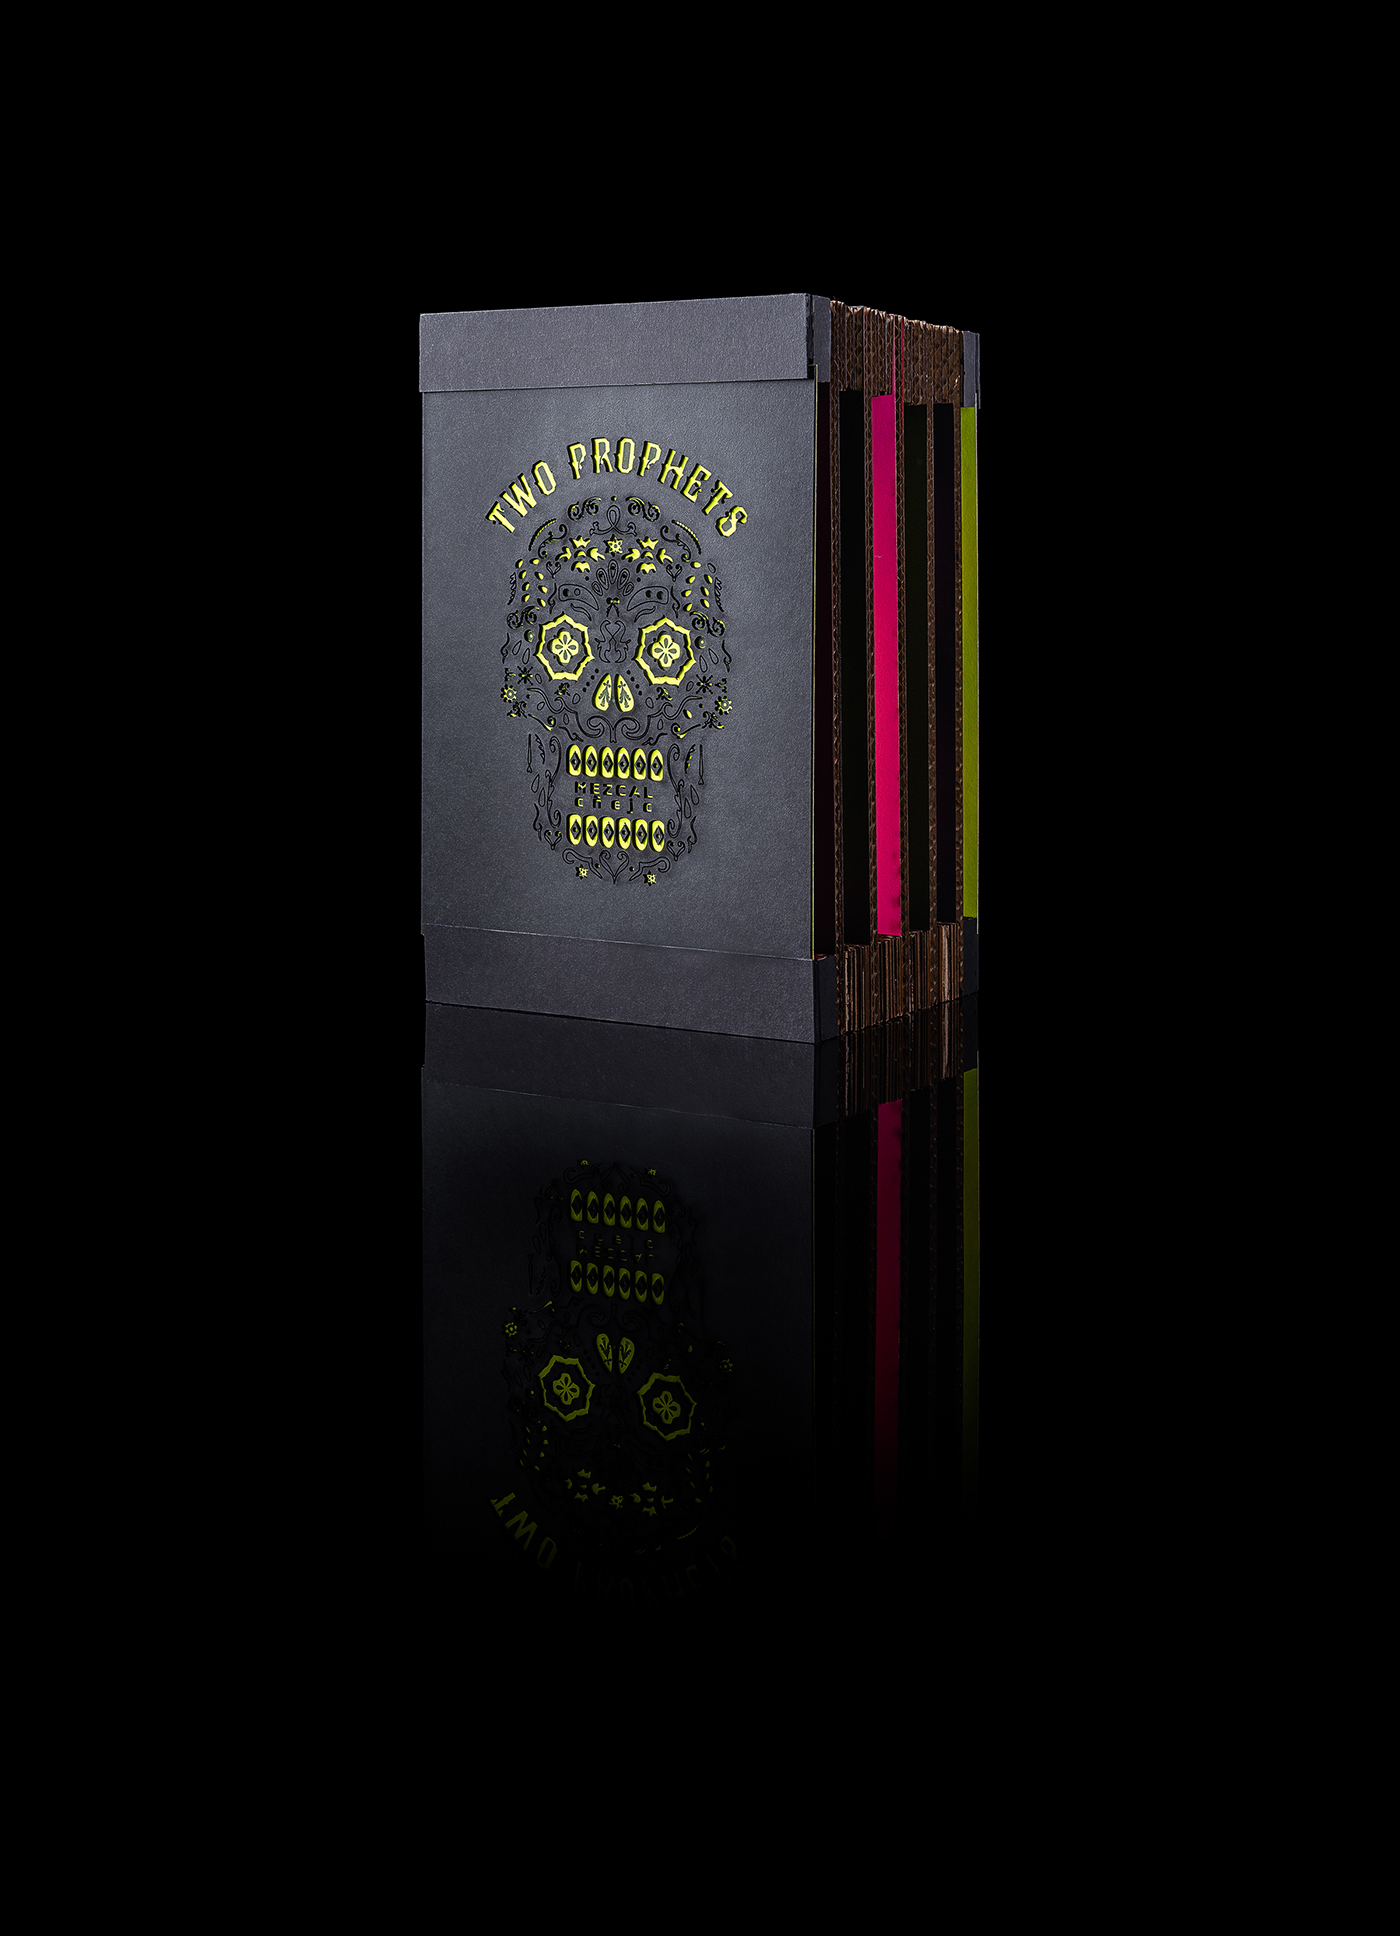 dia de los muertos day of the dead Mexican mezcal Spirits hybrid thedieline Moonshine adaa_2015 adaa_school academy_of_art_university adaa_country united_states adaa_packaging